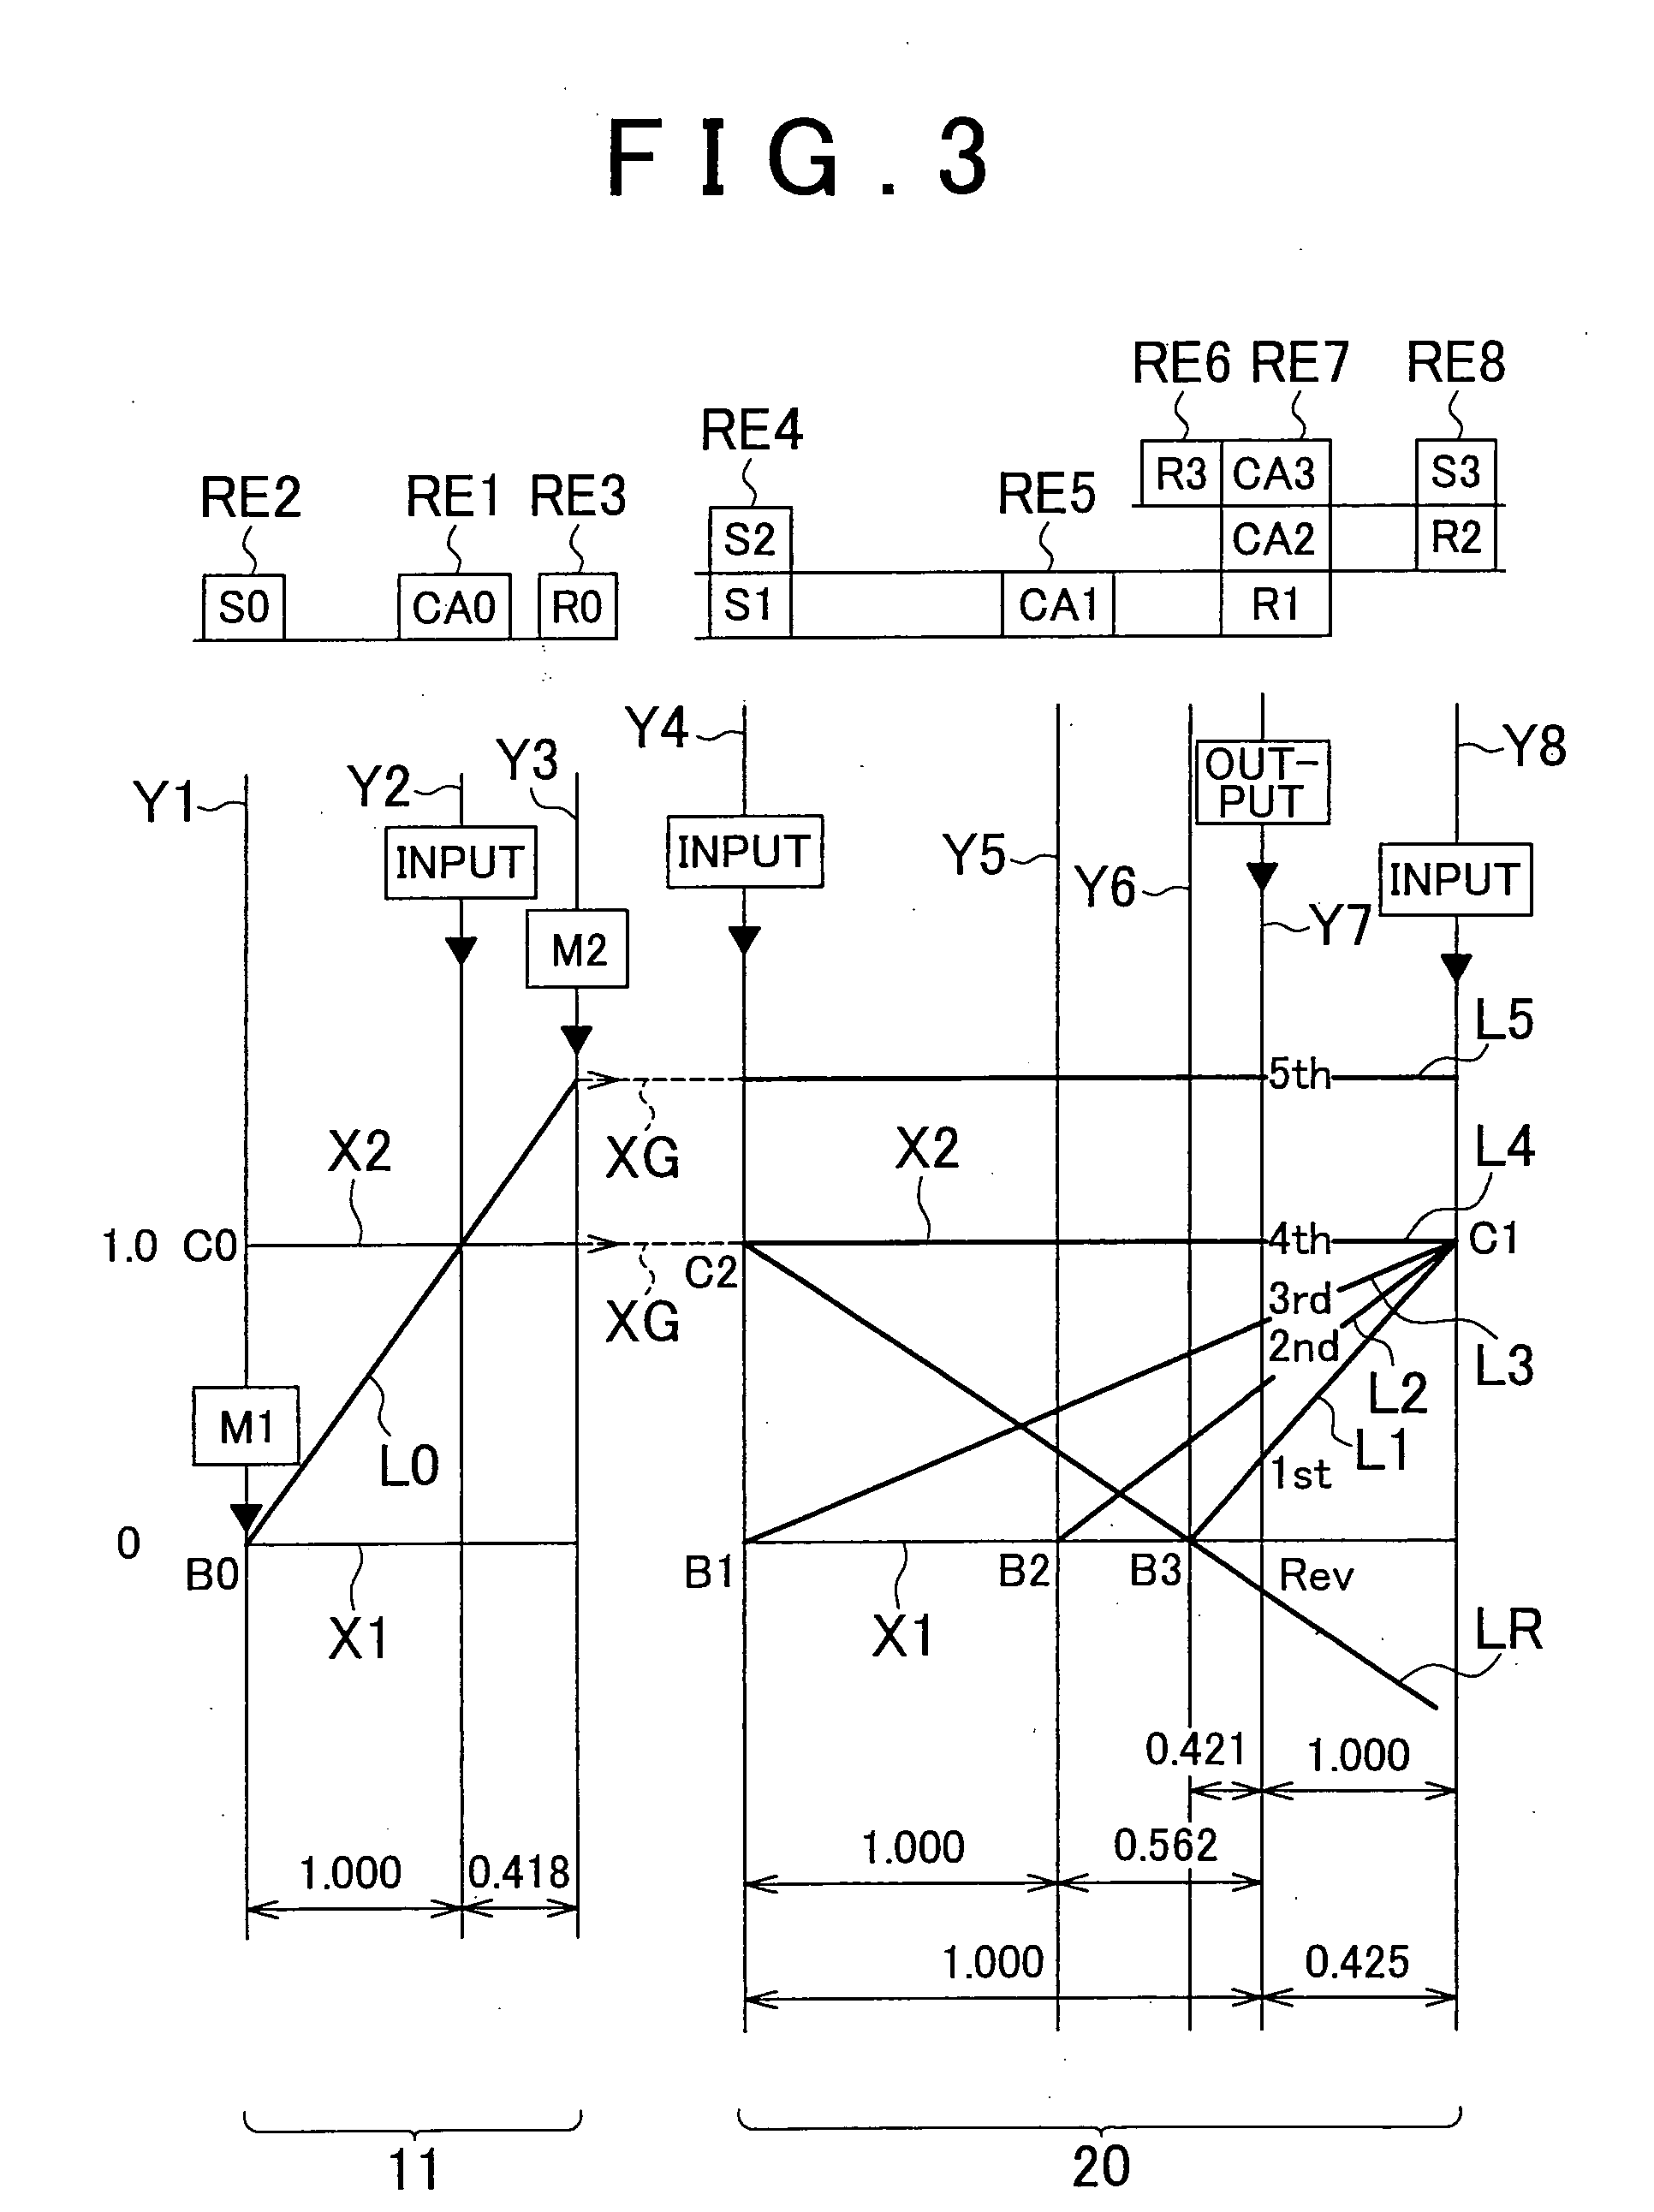 Control apparatus for power transmission system of hybrid vehicle